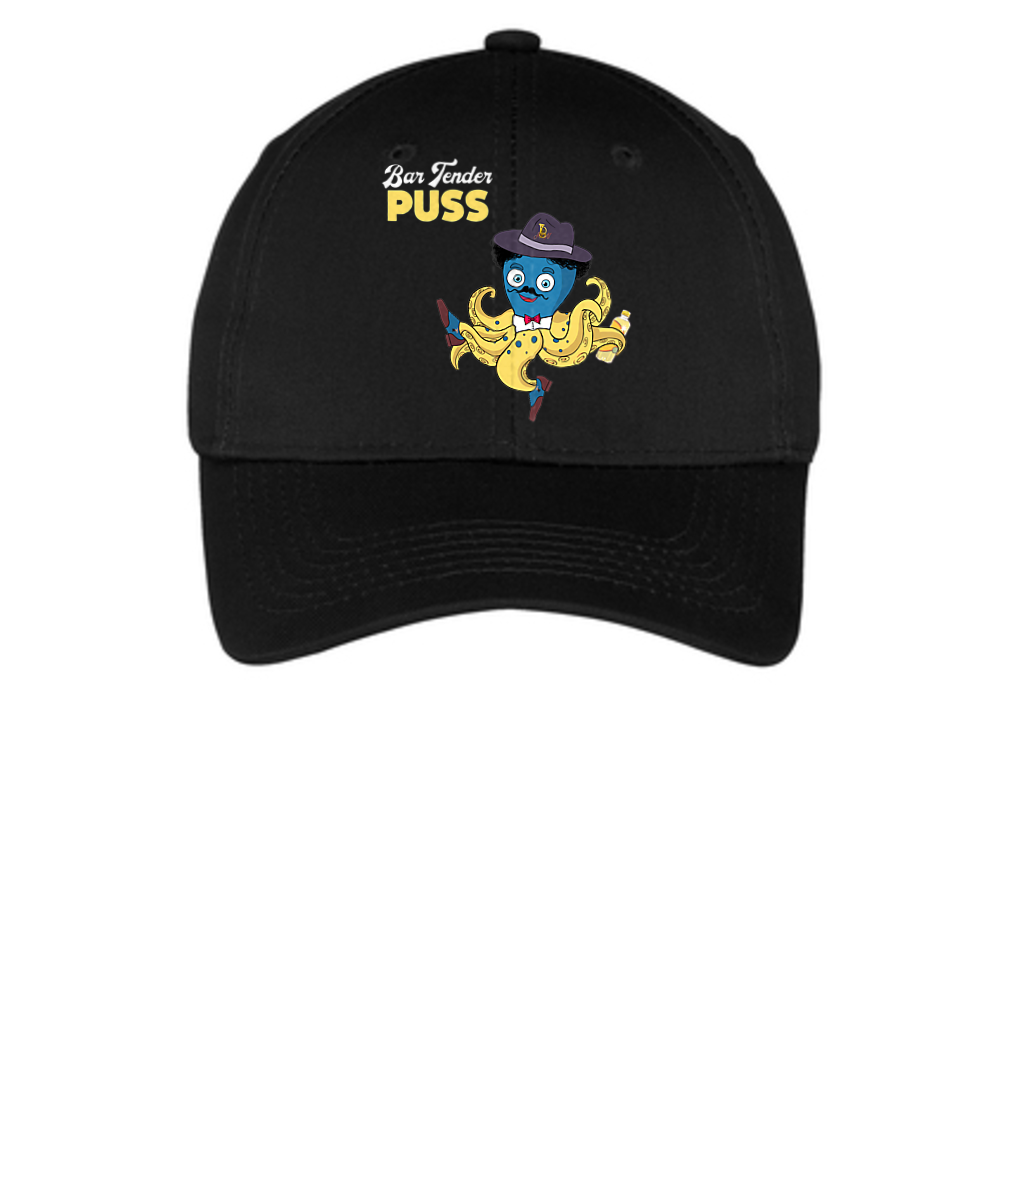 Bartender Puss- Embroidered Youth Six-Panel Twill Cap or Similar